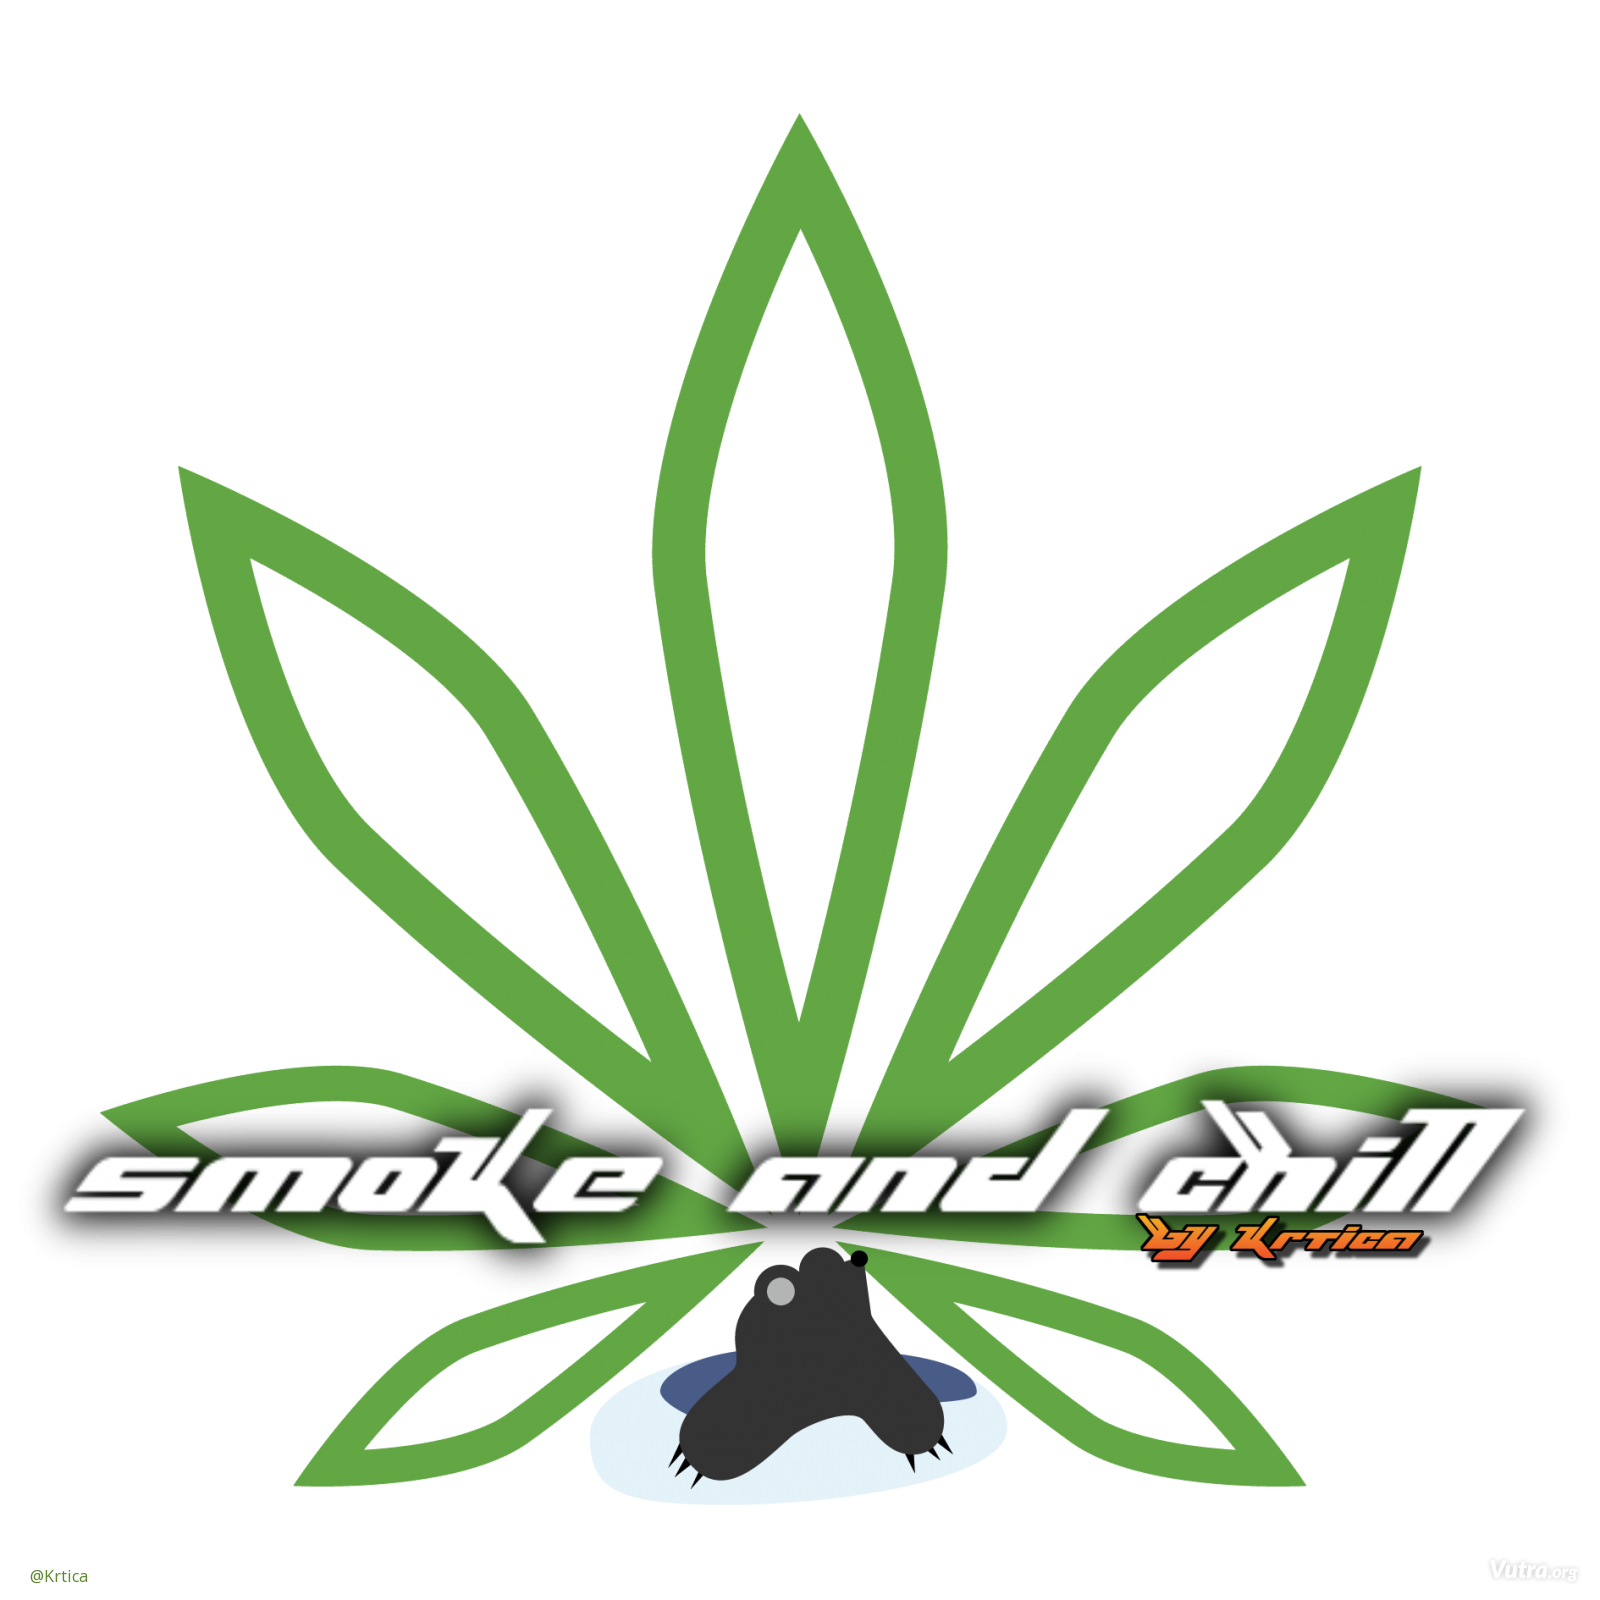 Smoke and chill with Krtonja na online radio KRTICA